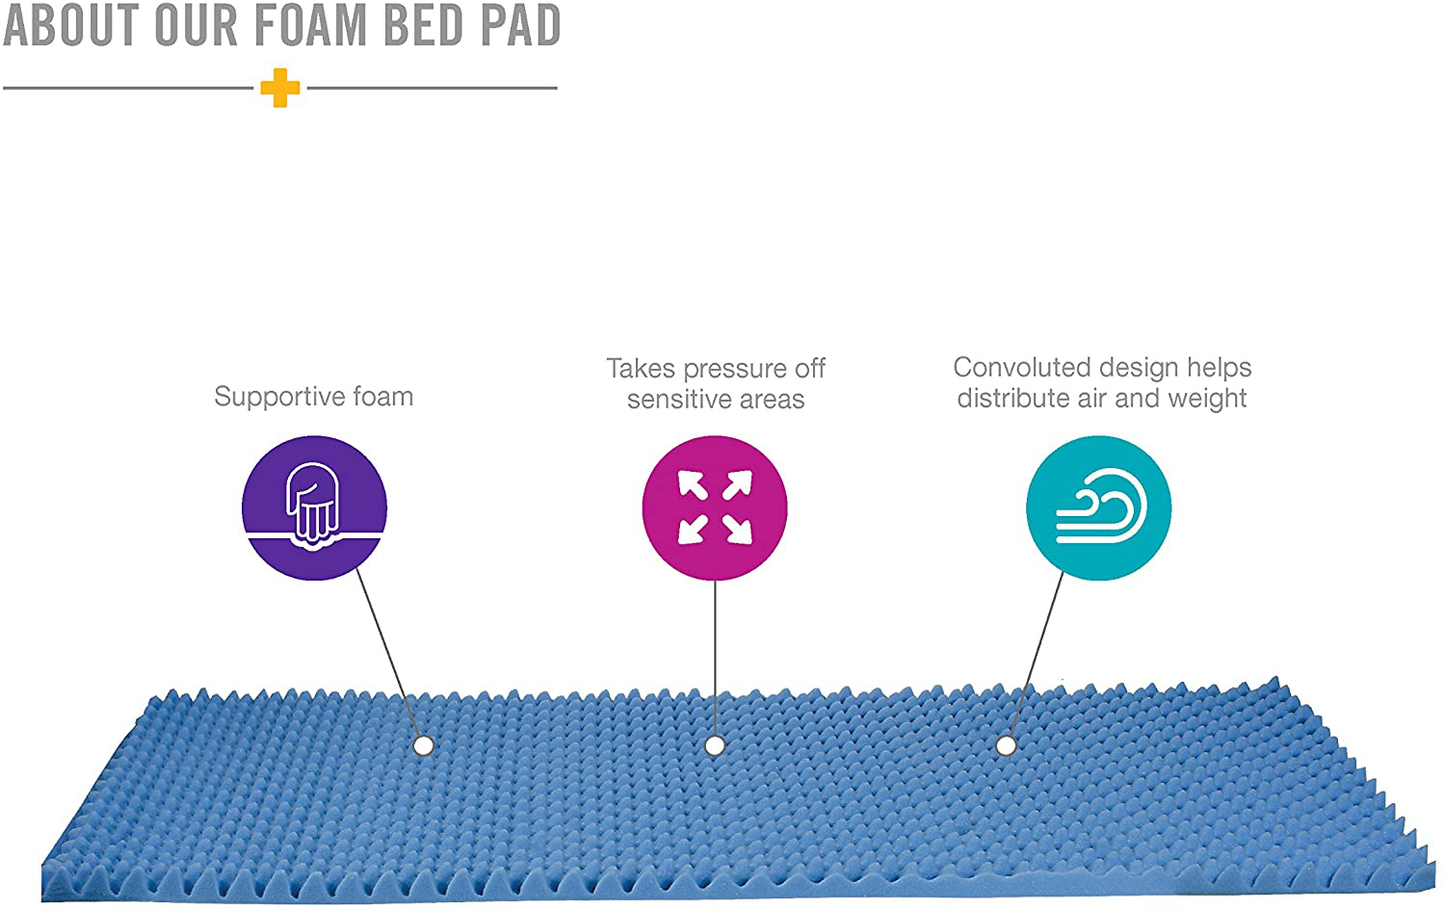 Duro-Med Foam Bed Topper, Hospital Bed Pad, Foam Bed Pad, Soft Foam Bed Topper for Support, Blue, Made in the USA, 33 x 72 x 2 Inch